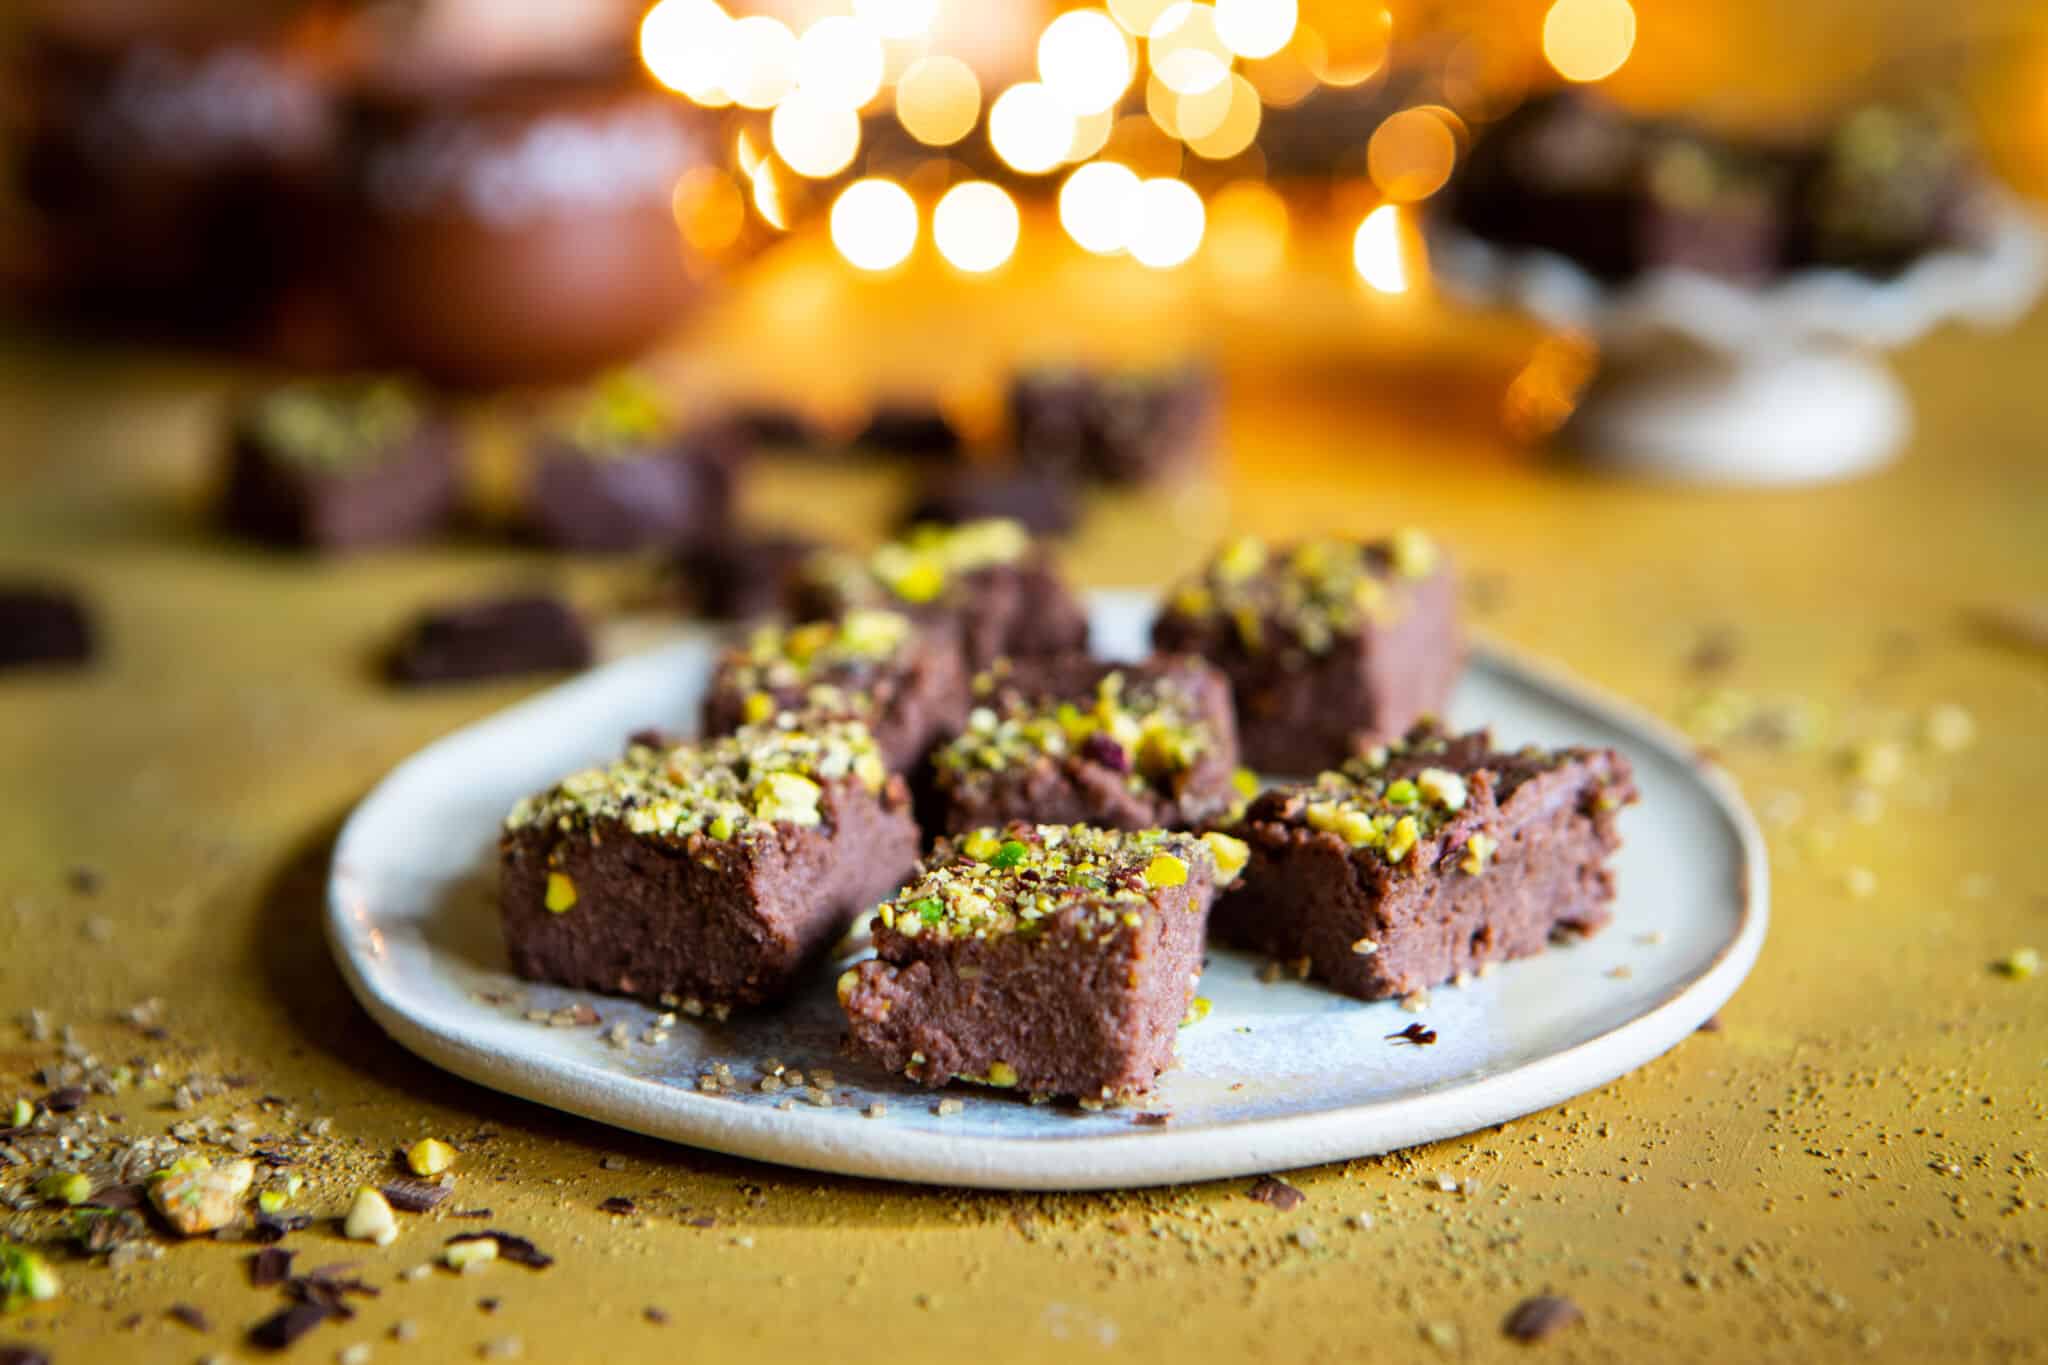 A plate of chocolate kalakand, cut into bars, sprinkled with chopped pistachios.